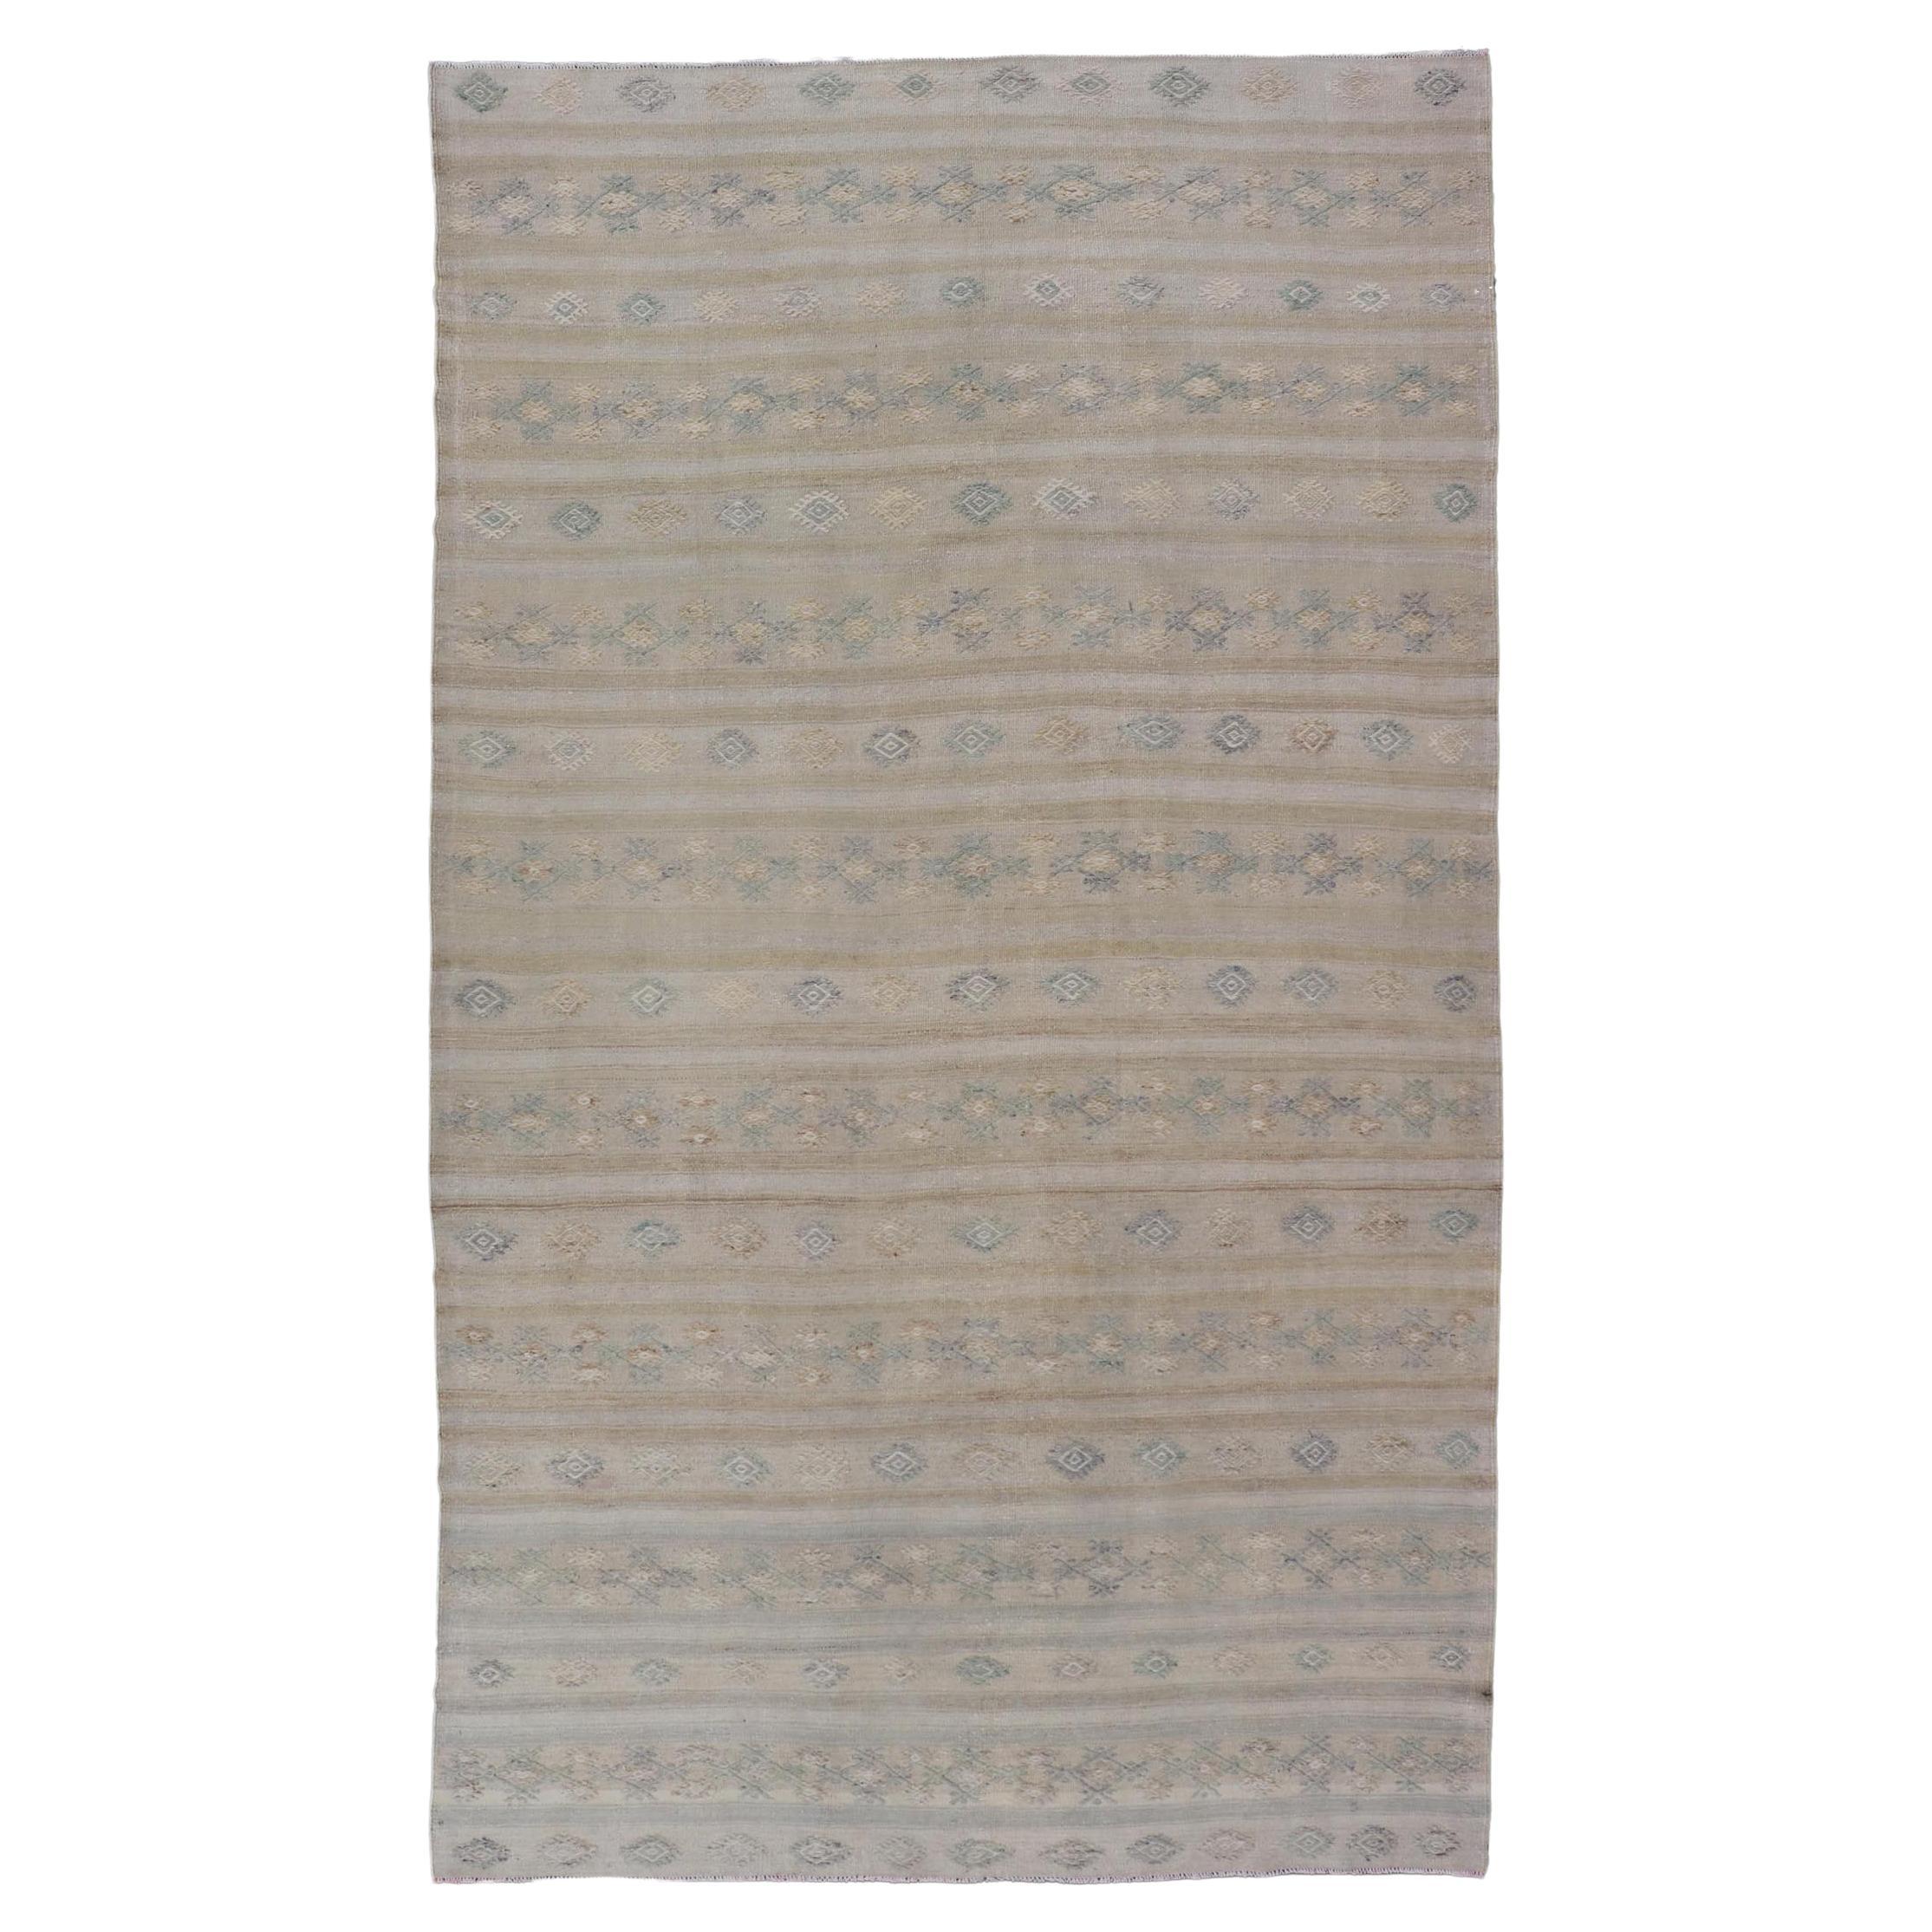 Turkish Vintage Gallery Flat-Weave Kilim With Stripes and Embroideries